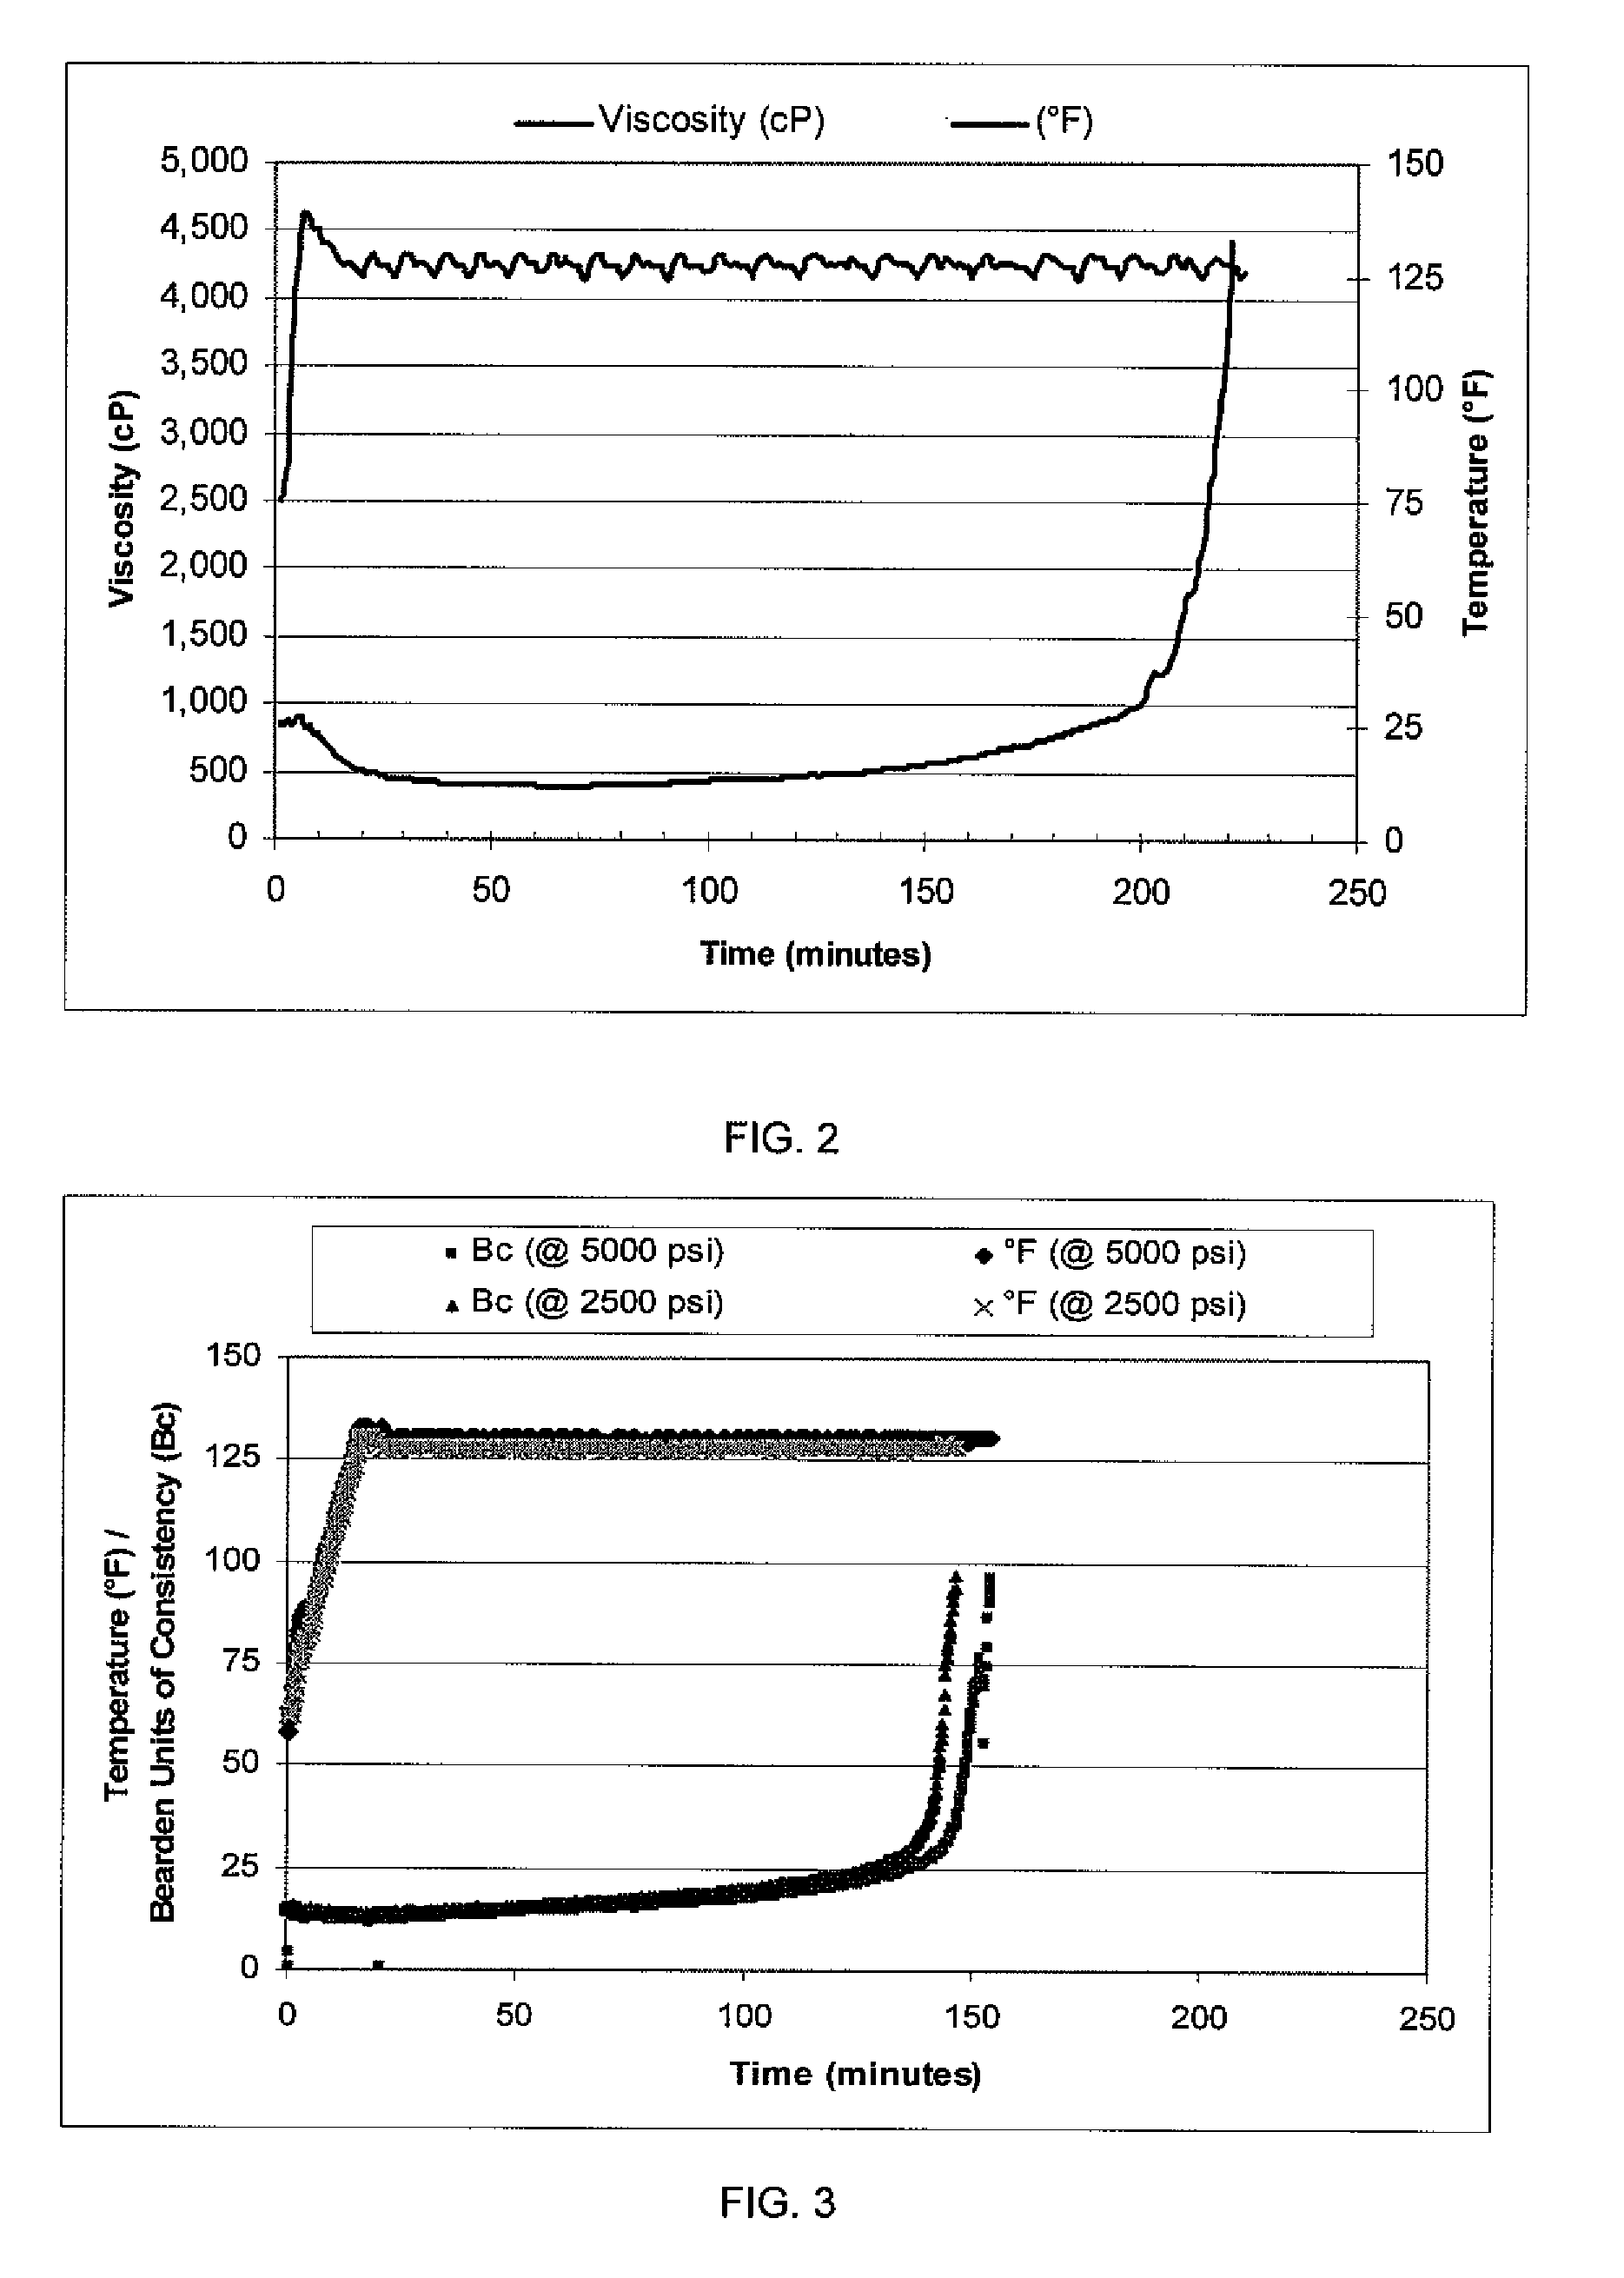 Methods of increasing fracture resistance in low permeability formations